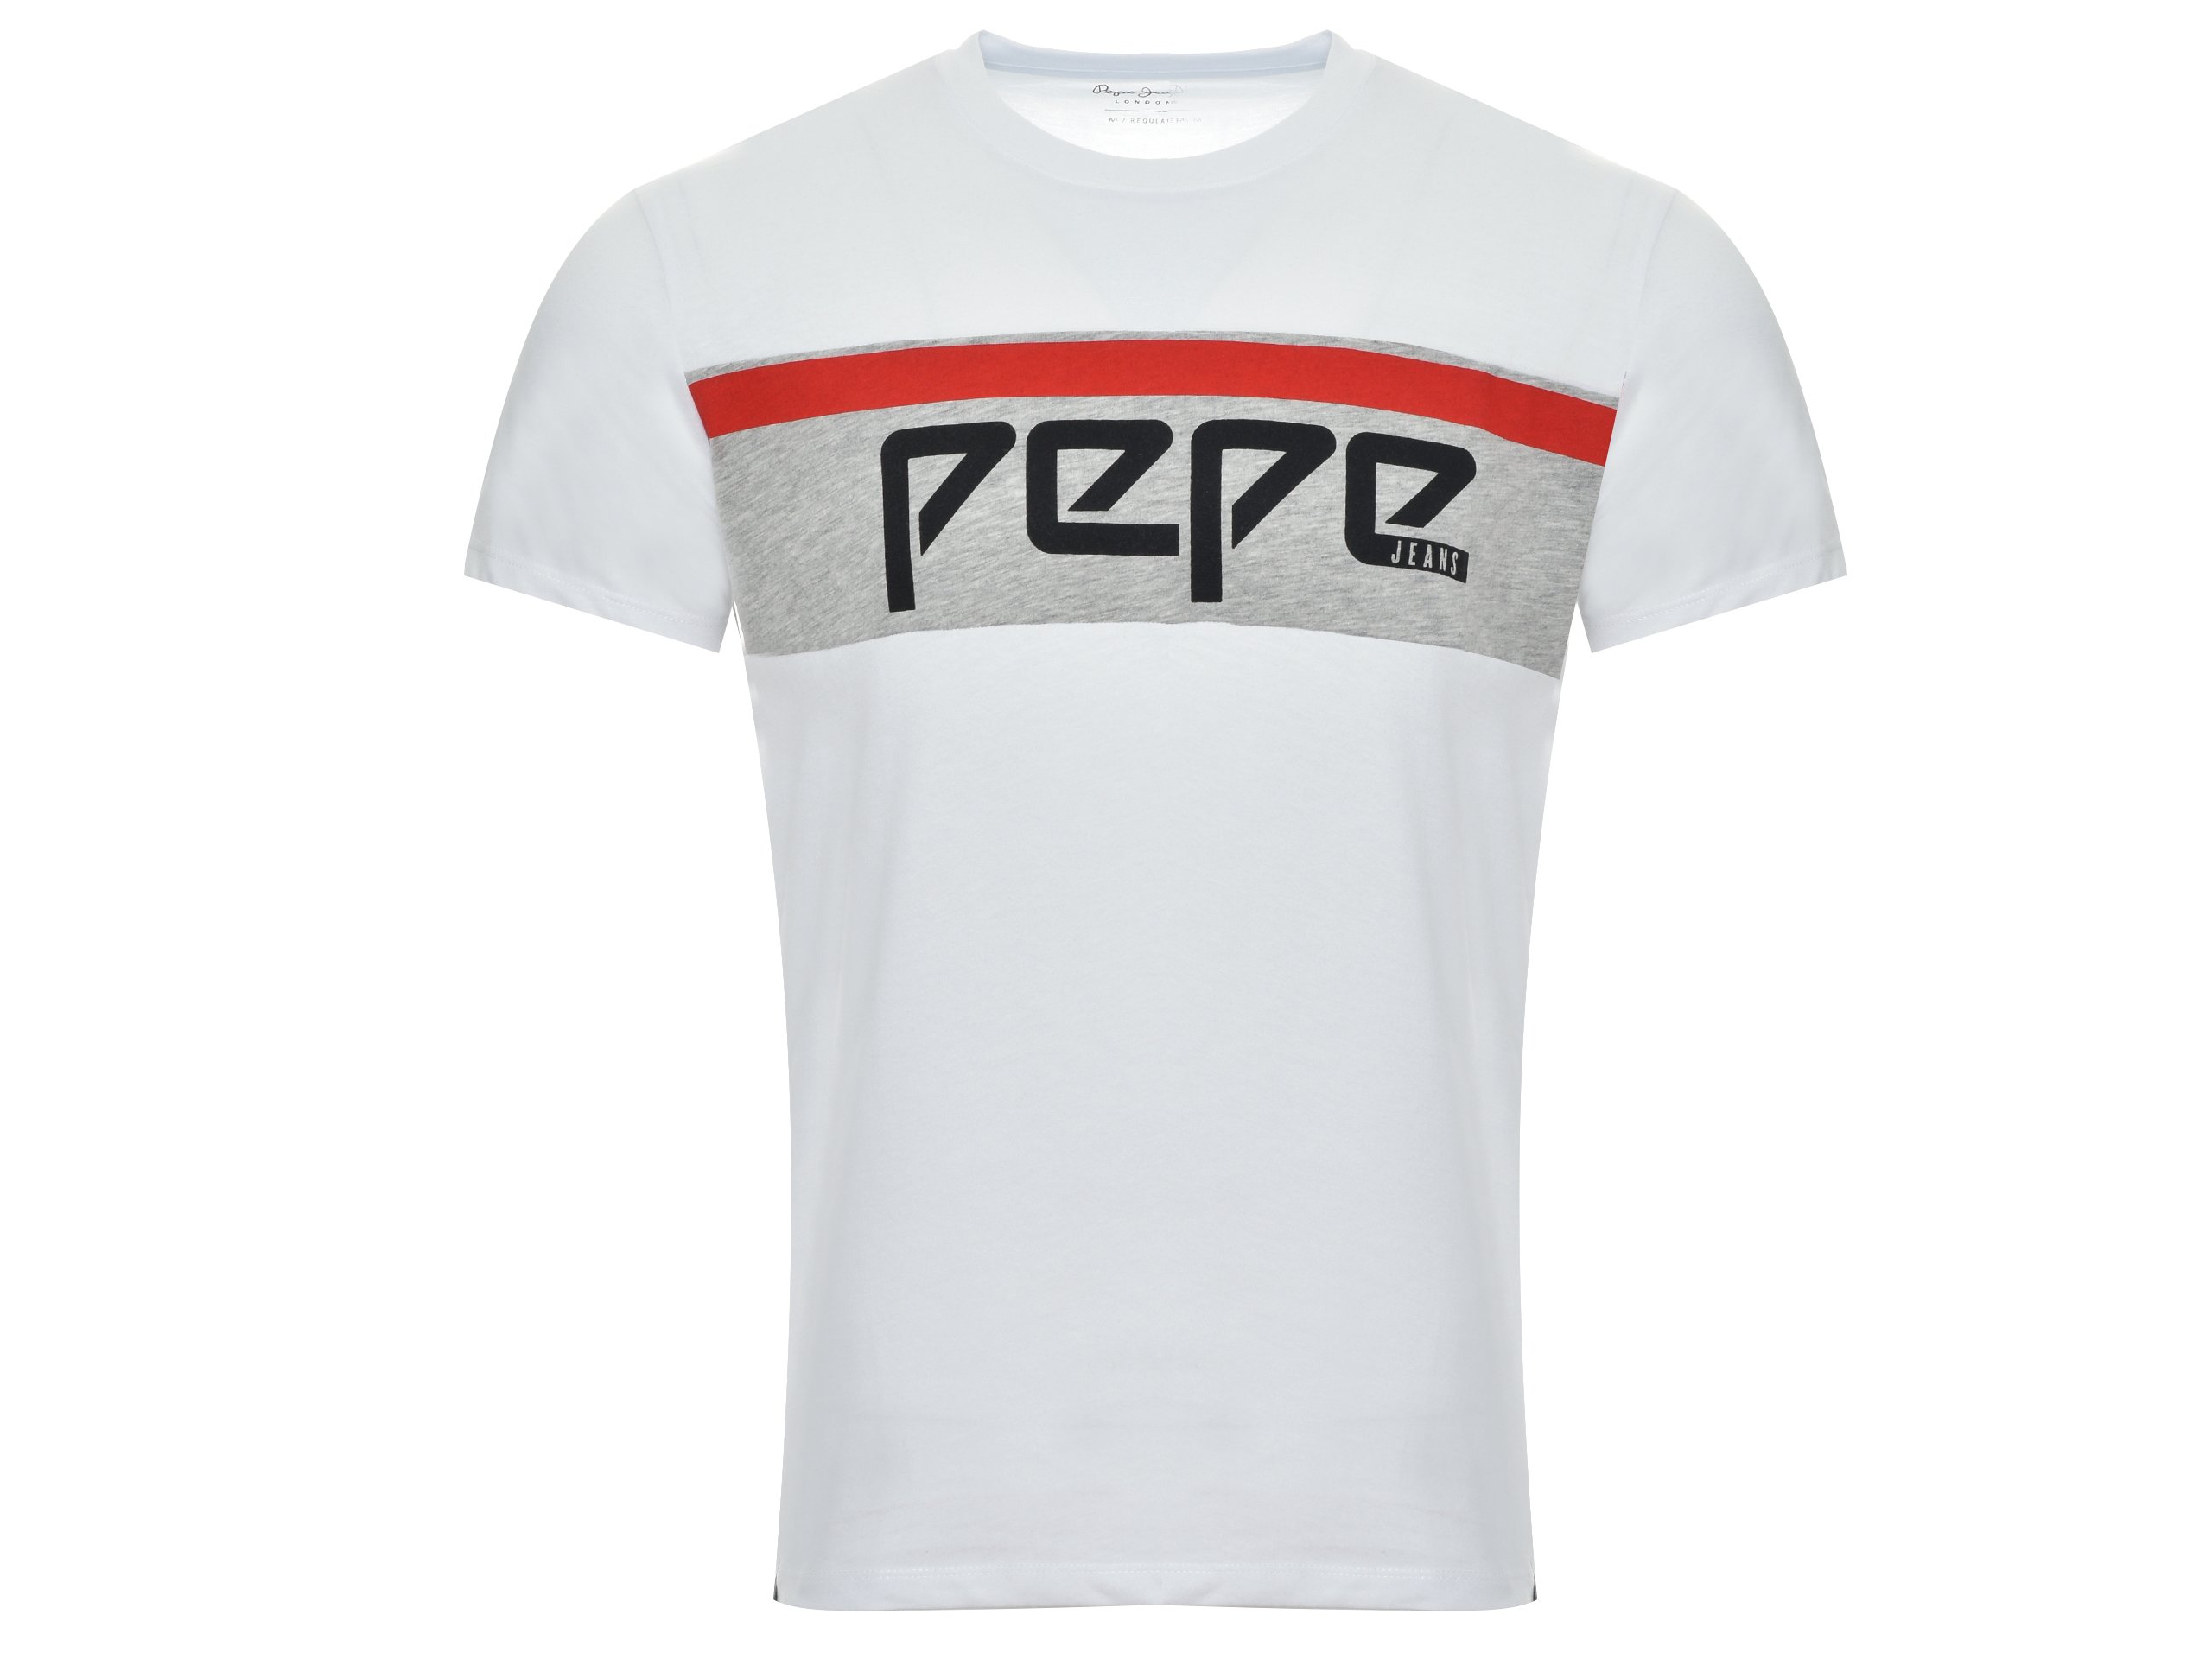 Pepe Jeans - London Nathan PM506306 800 - T-shirt - White Biały | Mens \ Pepe  Jeans | Kicks Sport - a trusted supplier of branded sports footwear